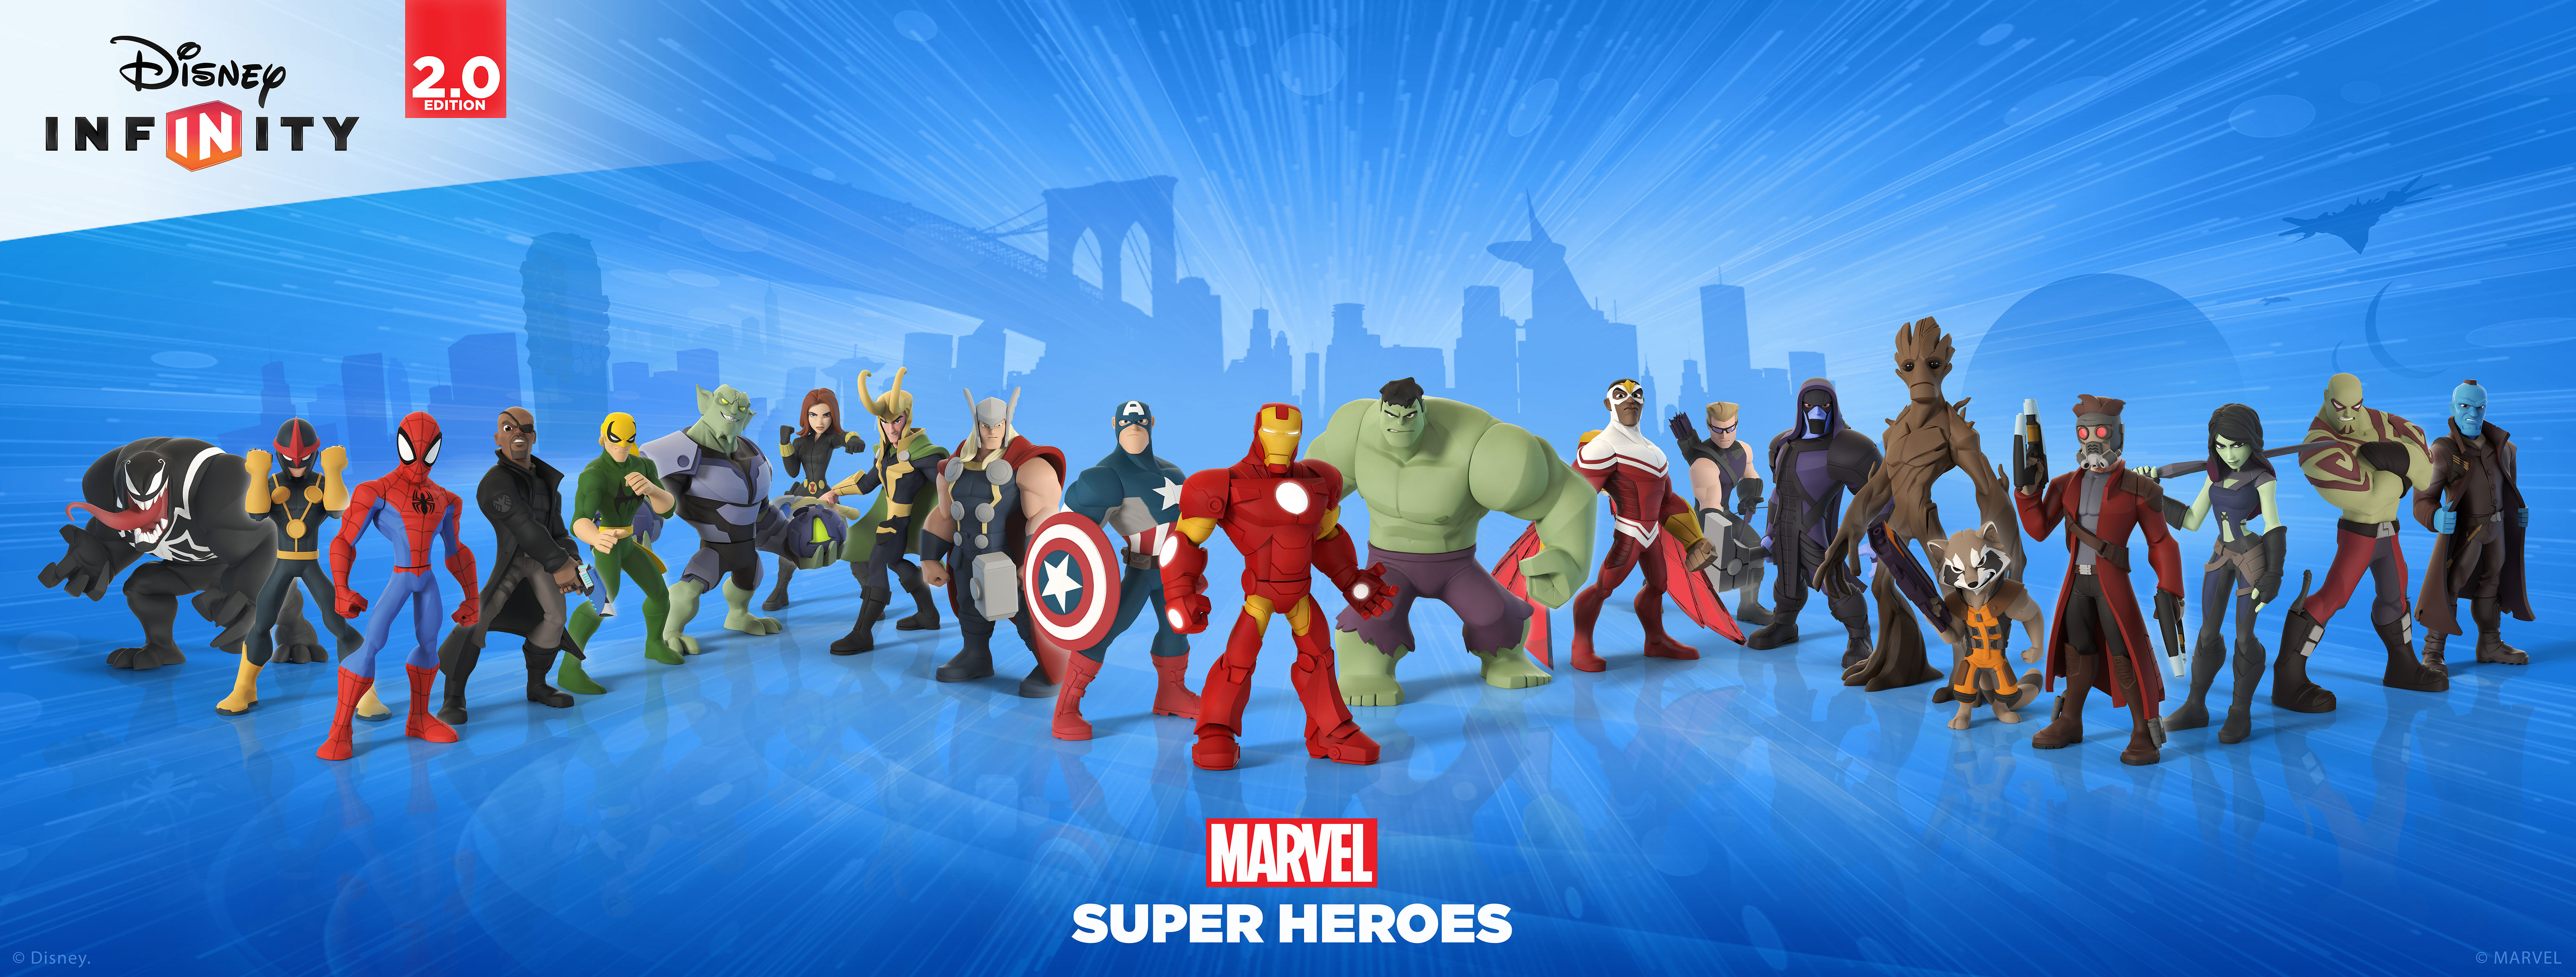 disney-infinity-marvel-super-heroes-game-on-playstation-3-and-4-playboxonline